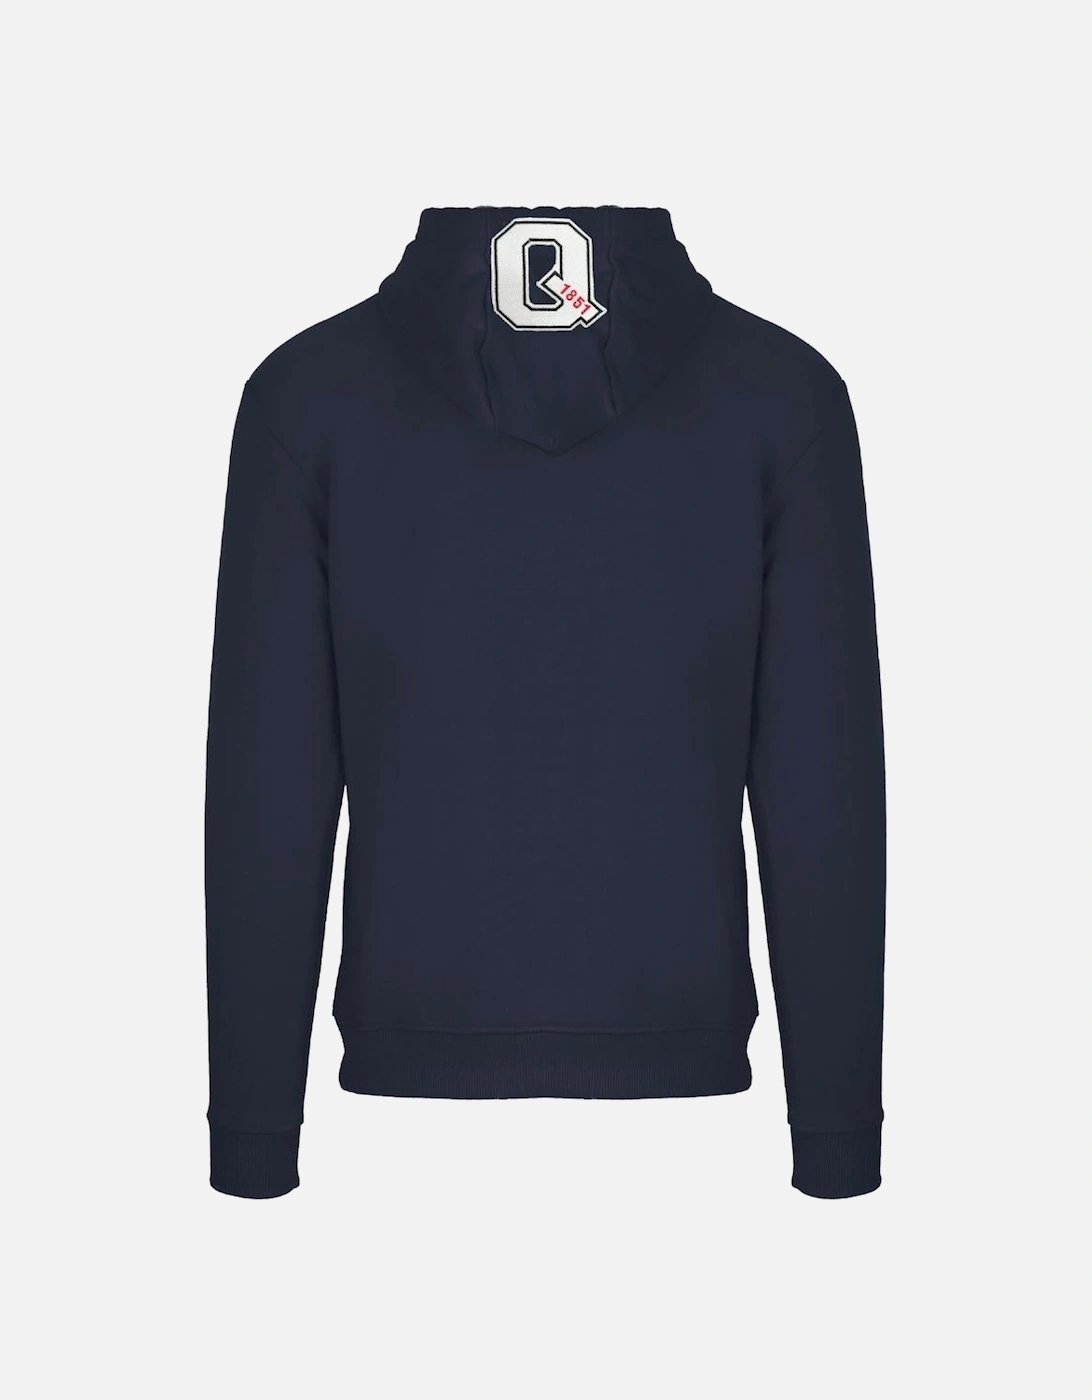 Classic Large A Logo Navy Blue Zip-Up Hoodie